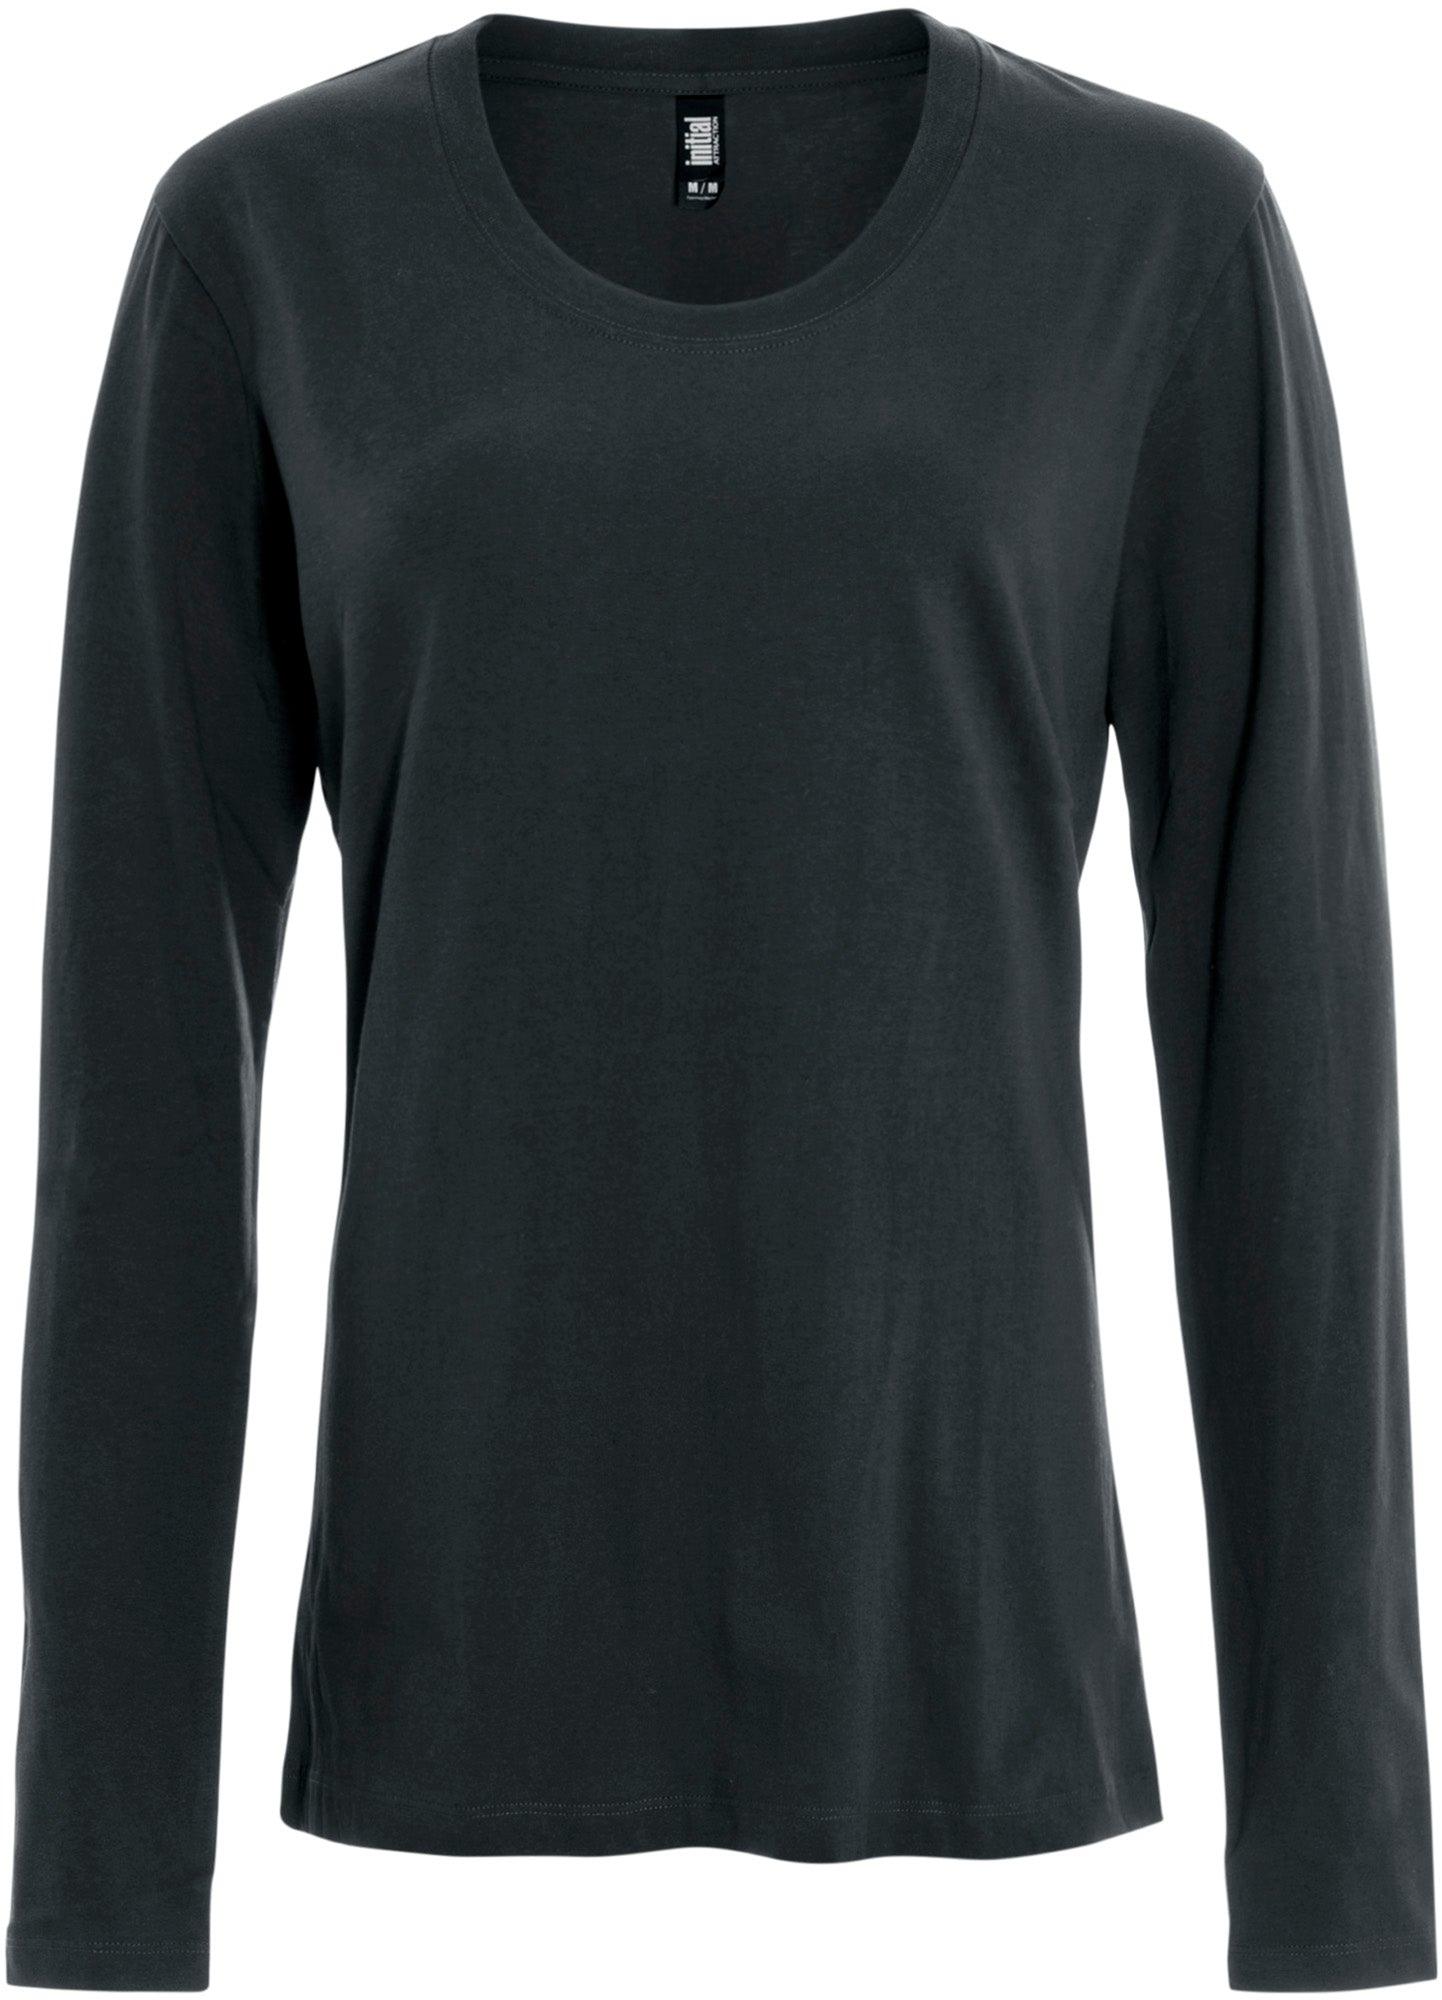 100L3HW - Women’s Long Sleeve T-Shirt - Colortex Screen Printing & Embroidery